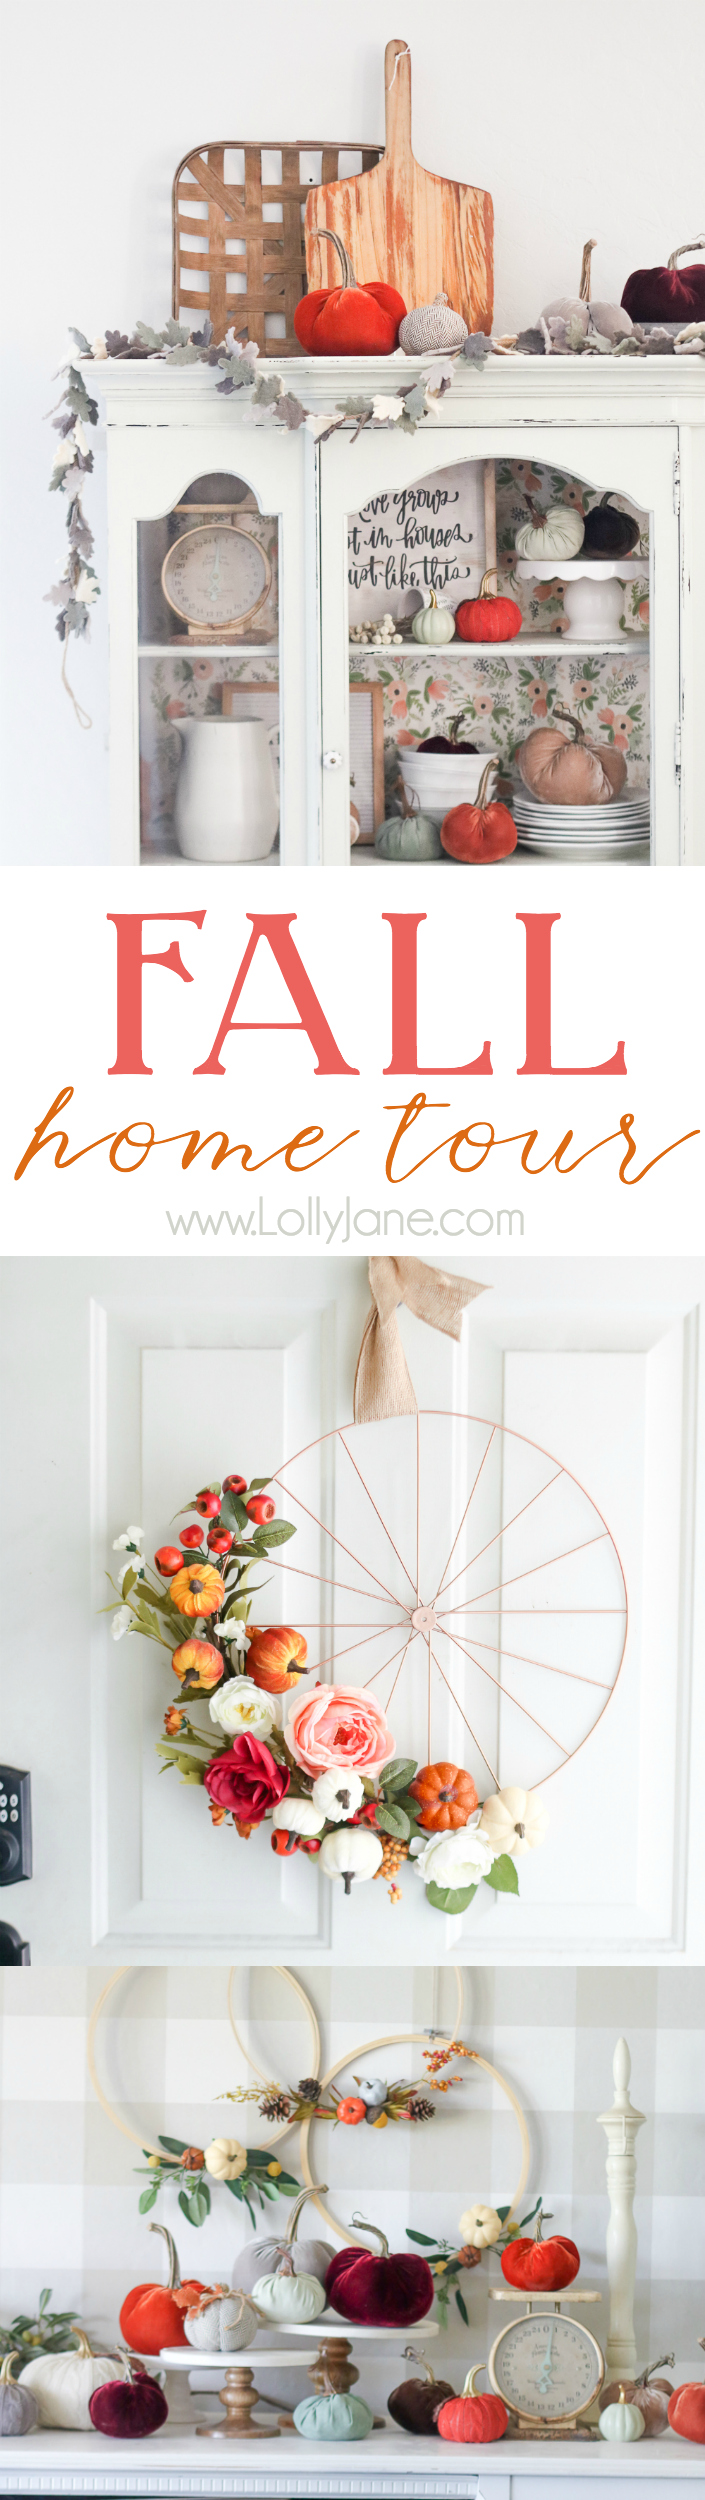 Beautiful Fall Mantel! Click to see 5 other homes decked out for fall, so festive and sure to get you in the mood for all things autumn!